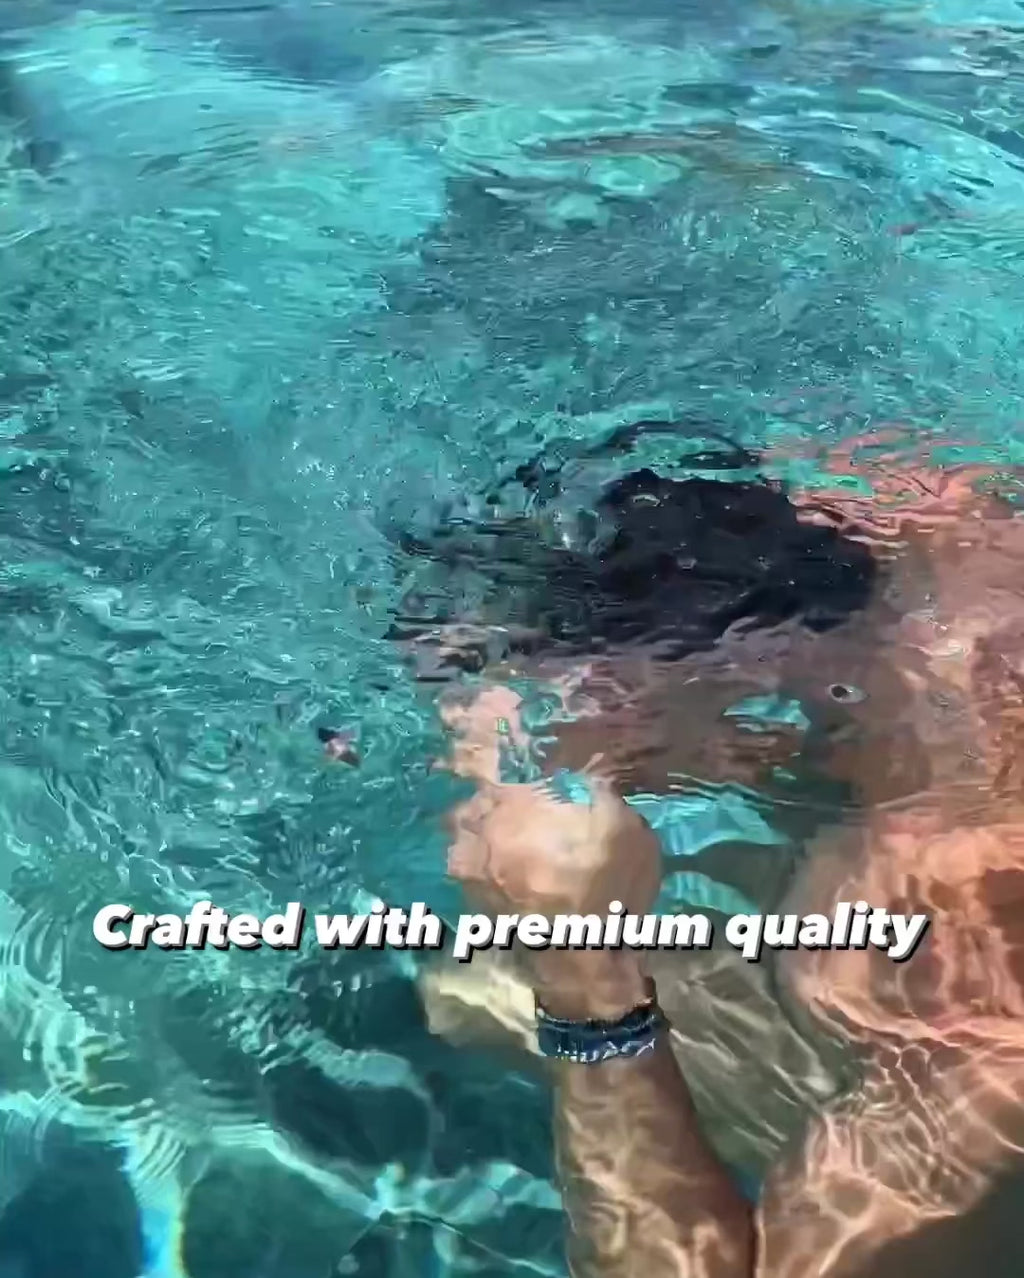 Video showing Emils Jewellery products in action. On the wrist and under water to show the premium quality